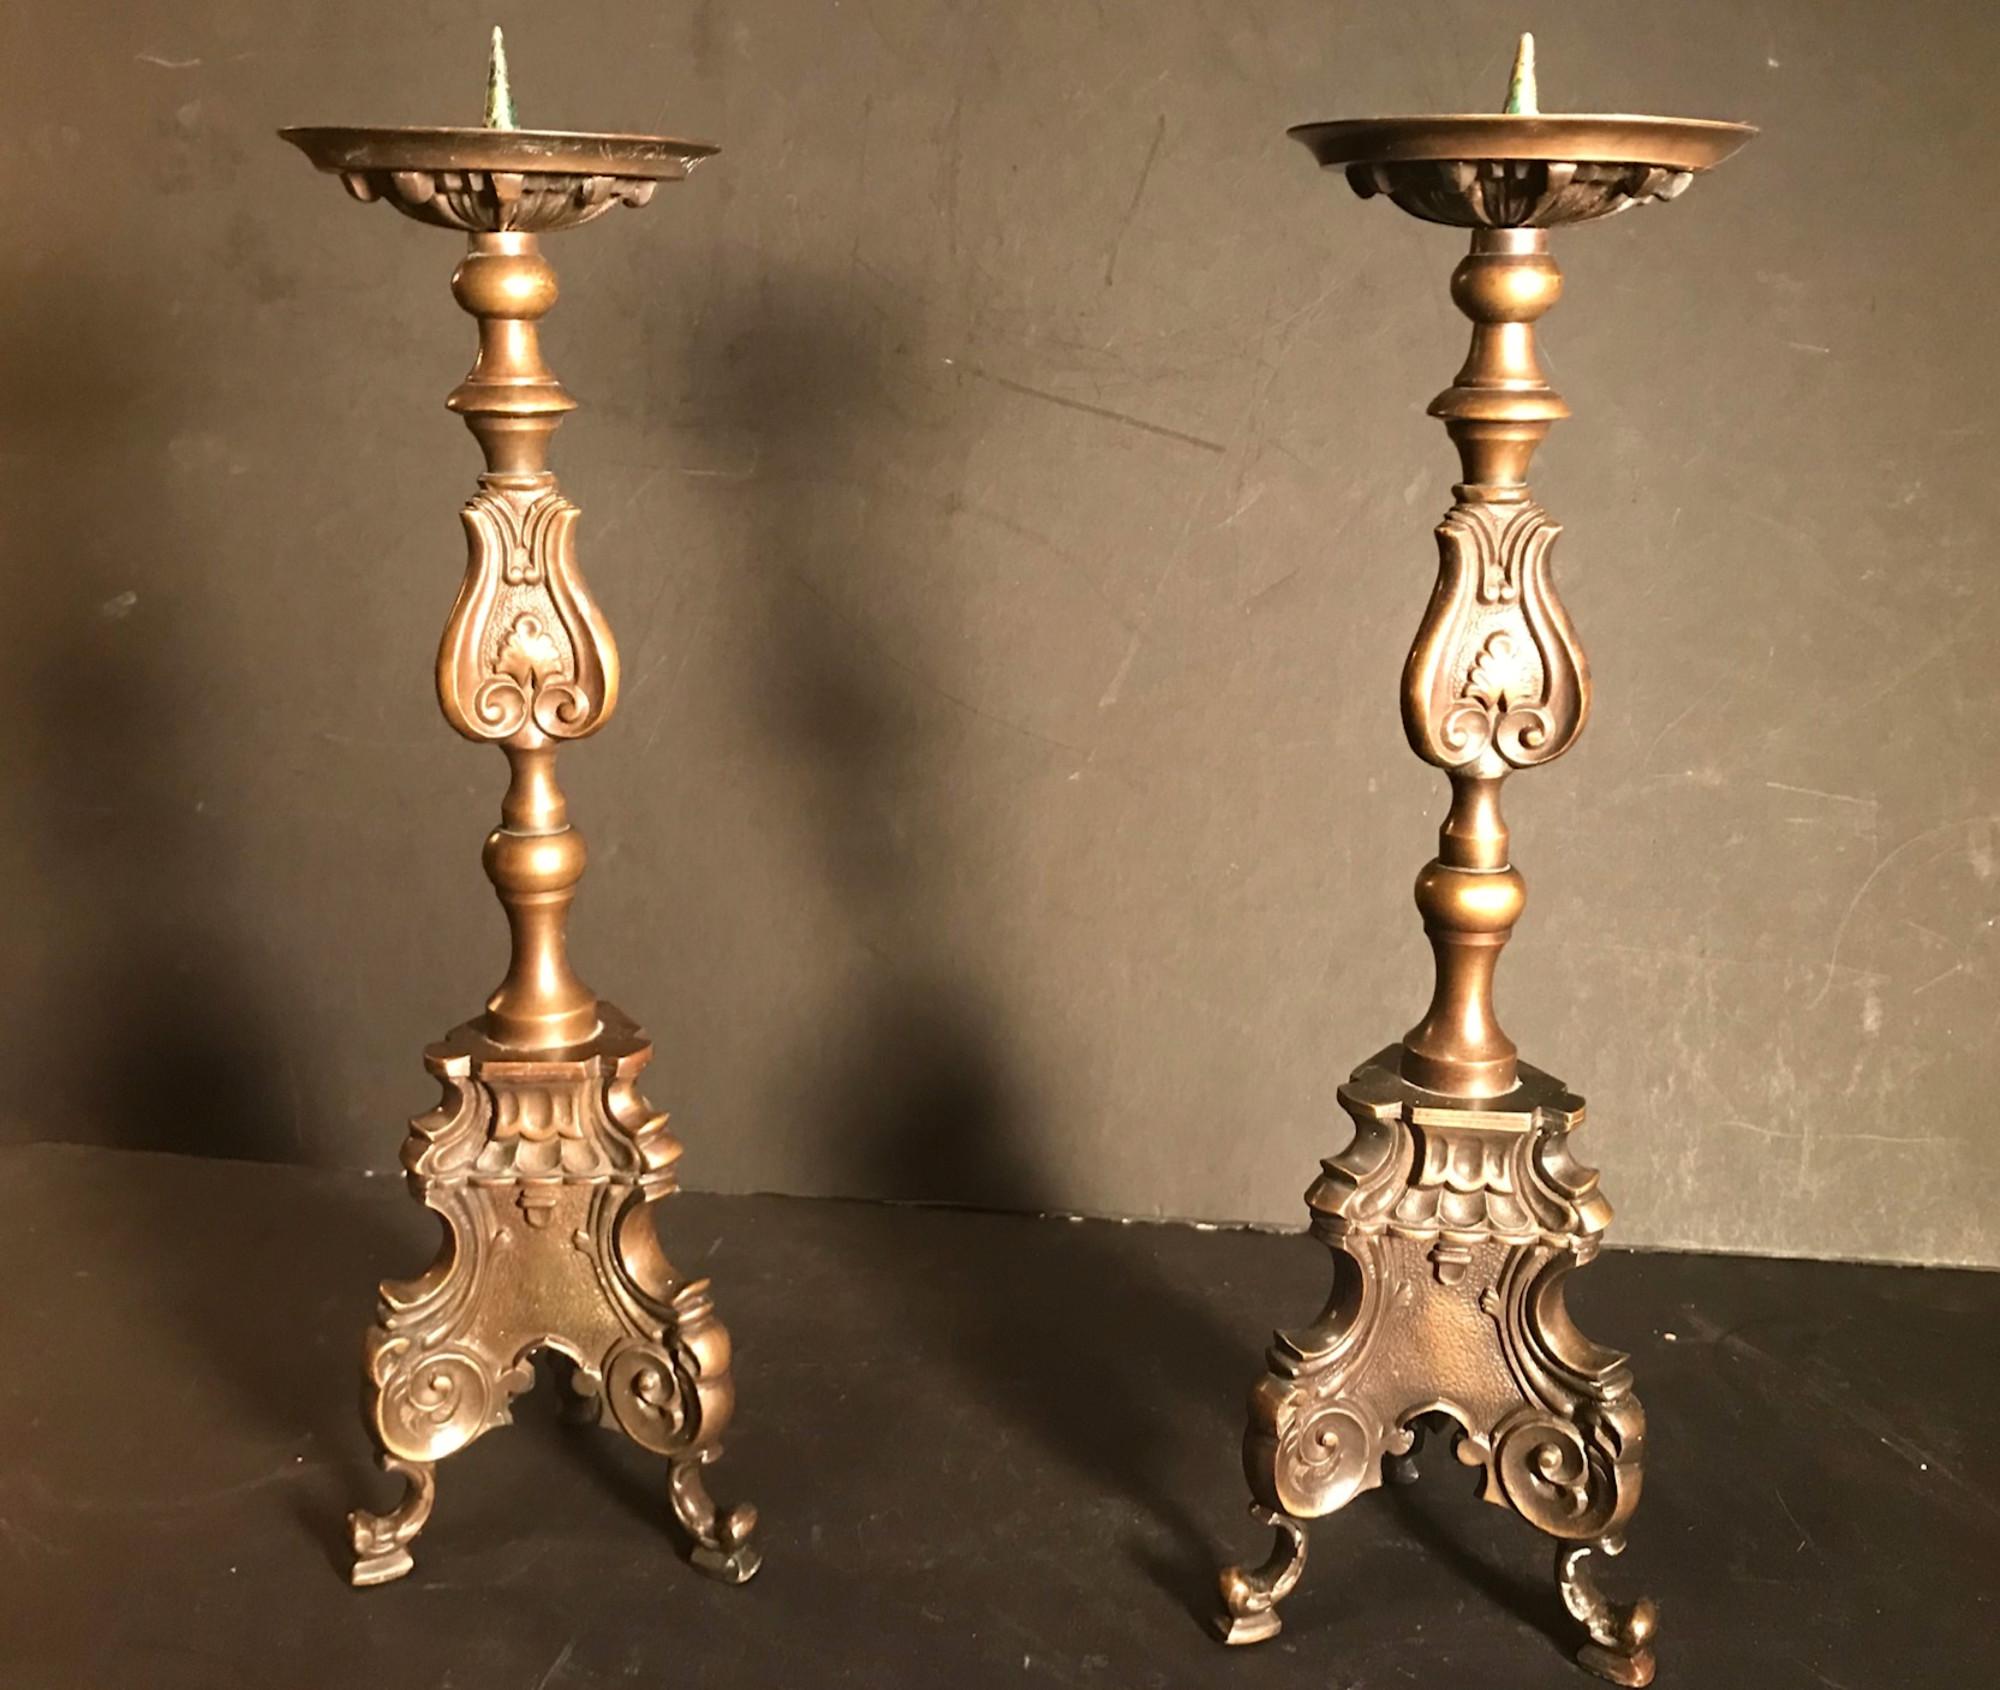 Pair of late 18th century Italian bronze Baroque Pricket candlesticks

A striking pair of Italian bronze pricket candlesticks. Each supports a baluster shaped stem with a spreading triform base embossed with Baroque foliate and scroll motives. These